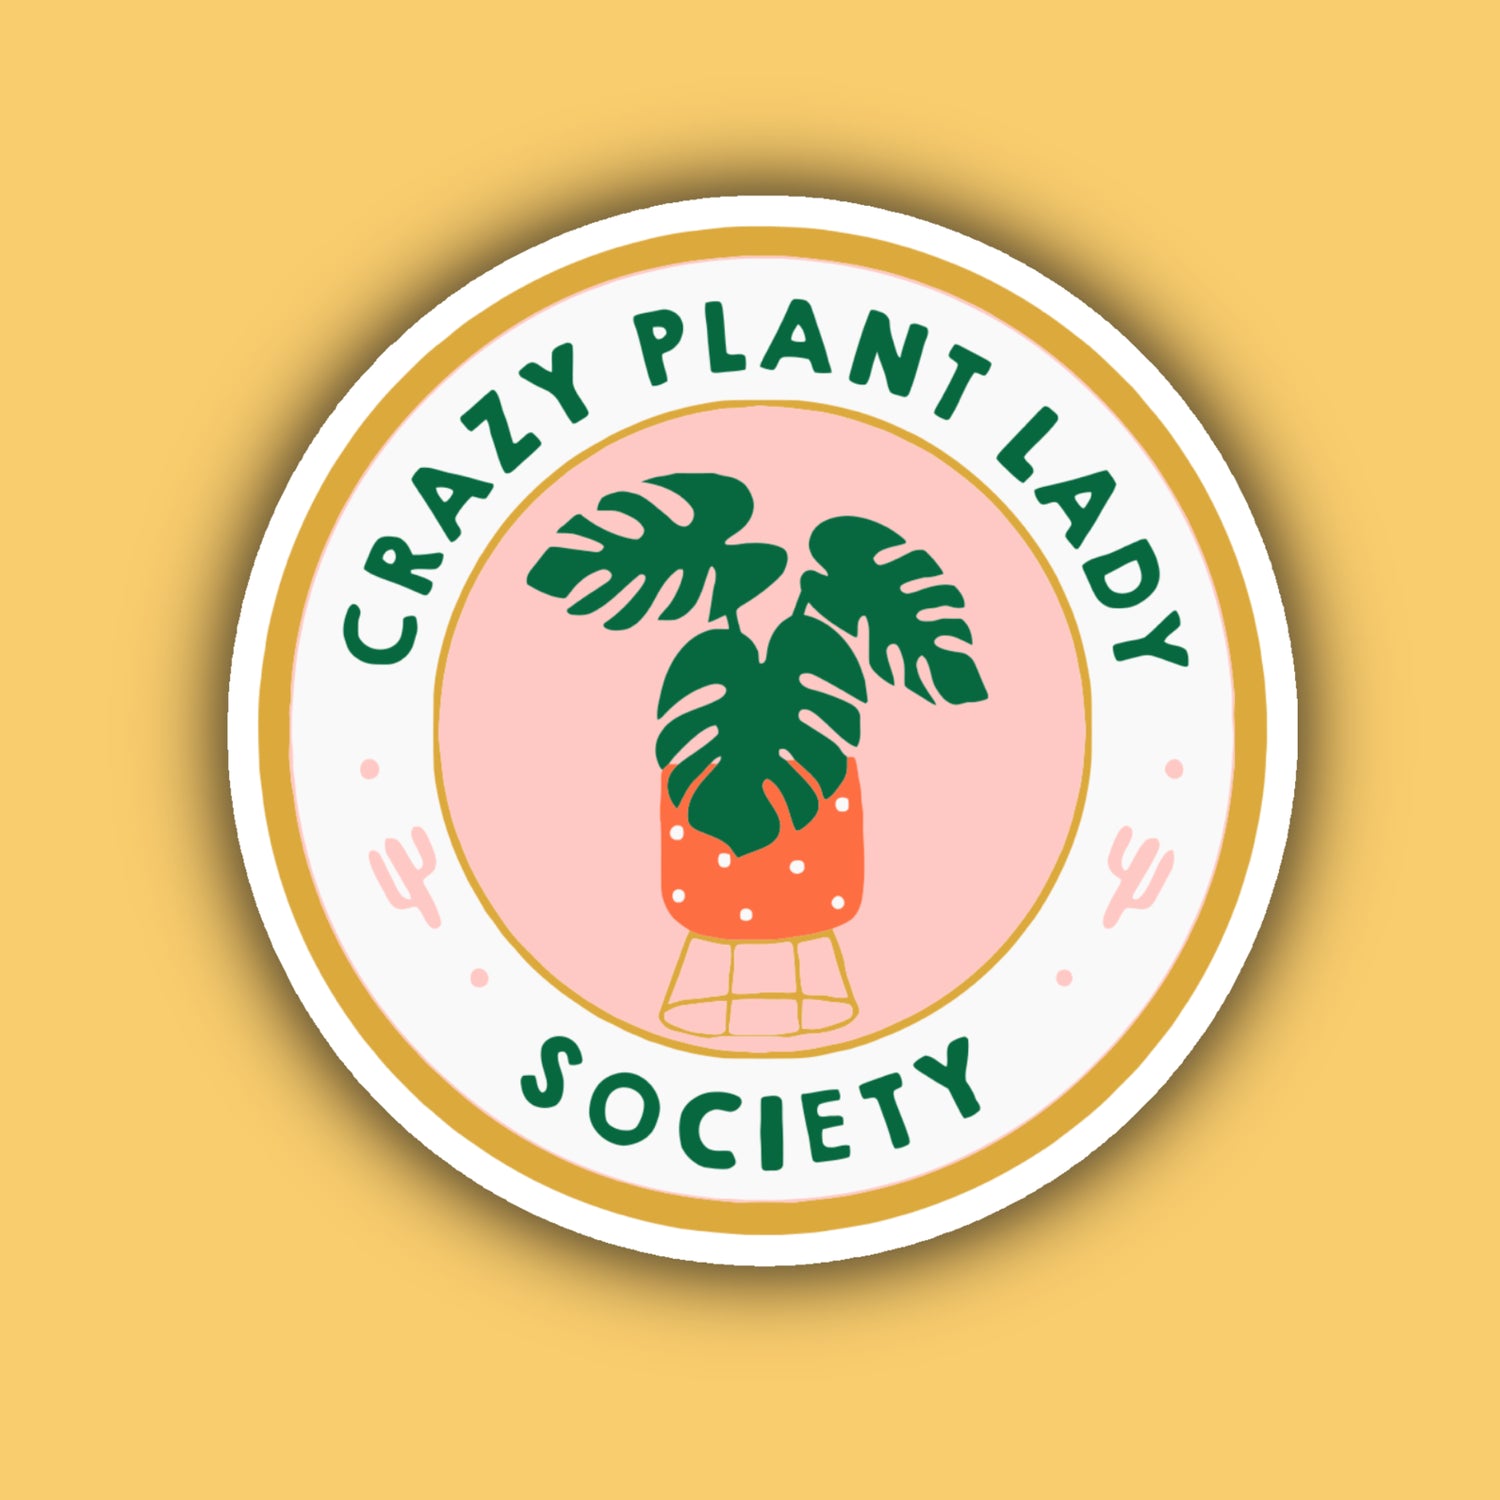 Crazy Plant Lady Society  Sticker - Moon Room Shop and Wellness